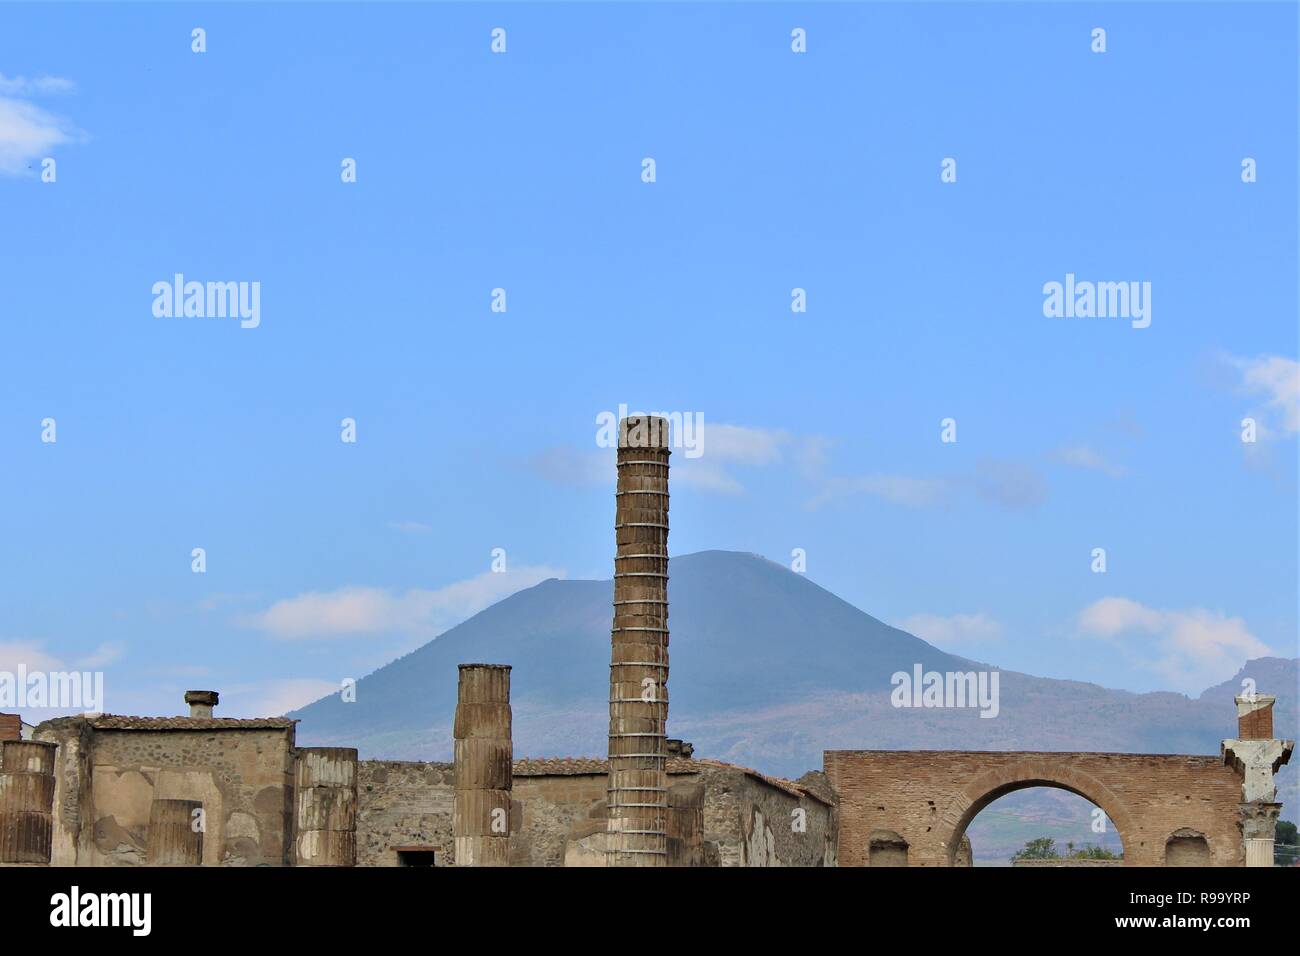 Ruins of the ancient Roman city of Pompeii, Italy, with the Mount Vesuvius volcano that destroyed it in the background. Stock Photo